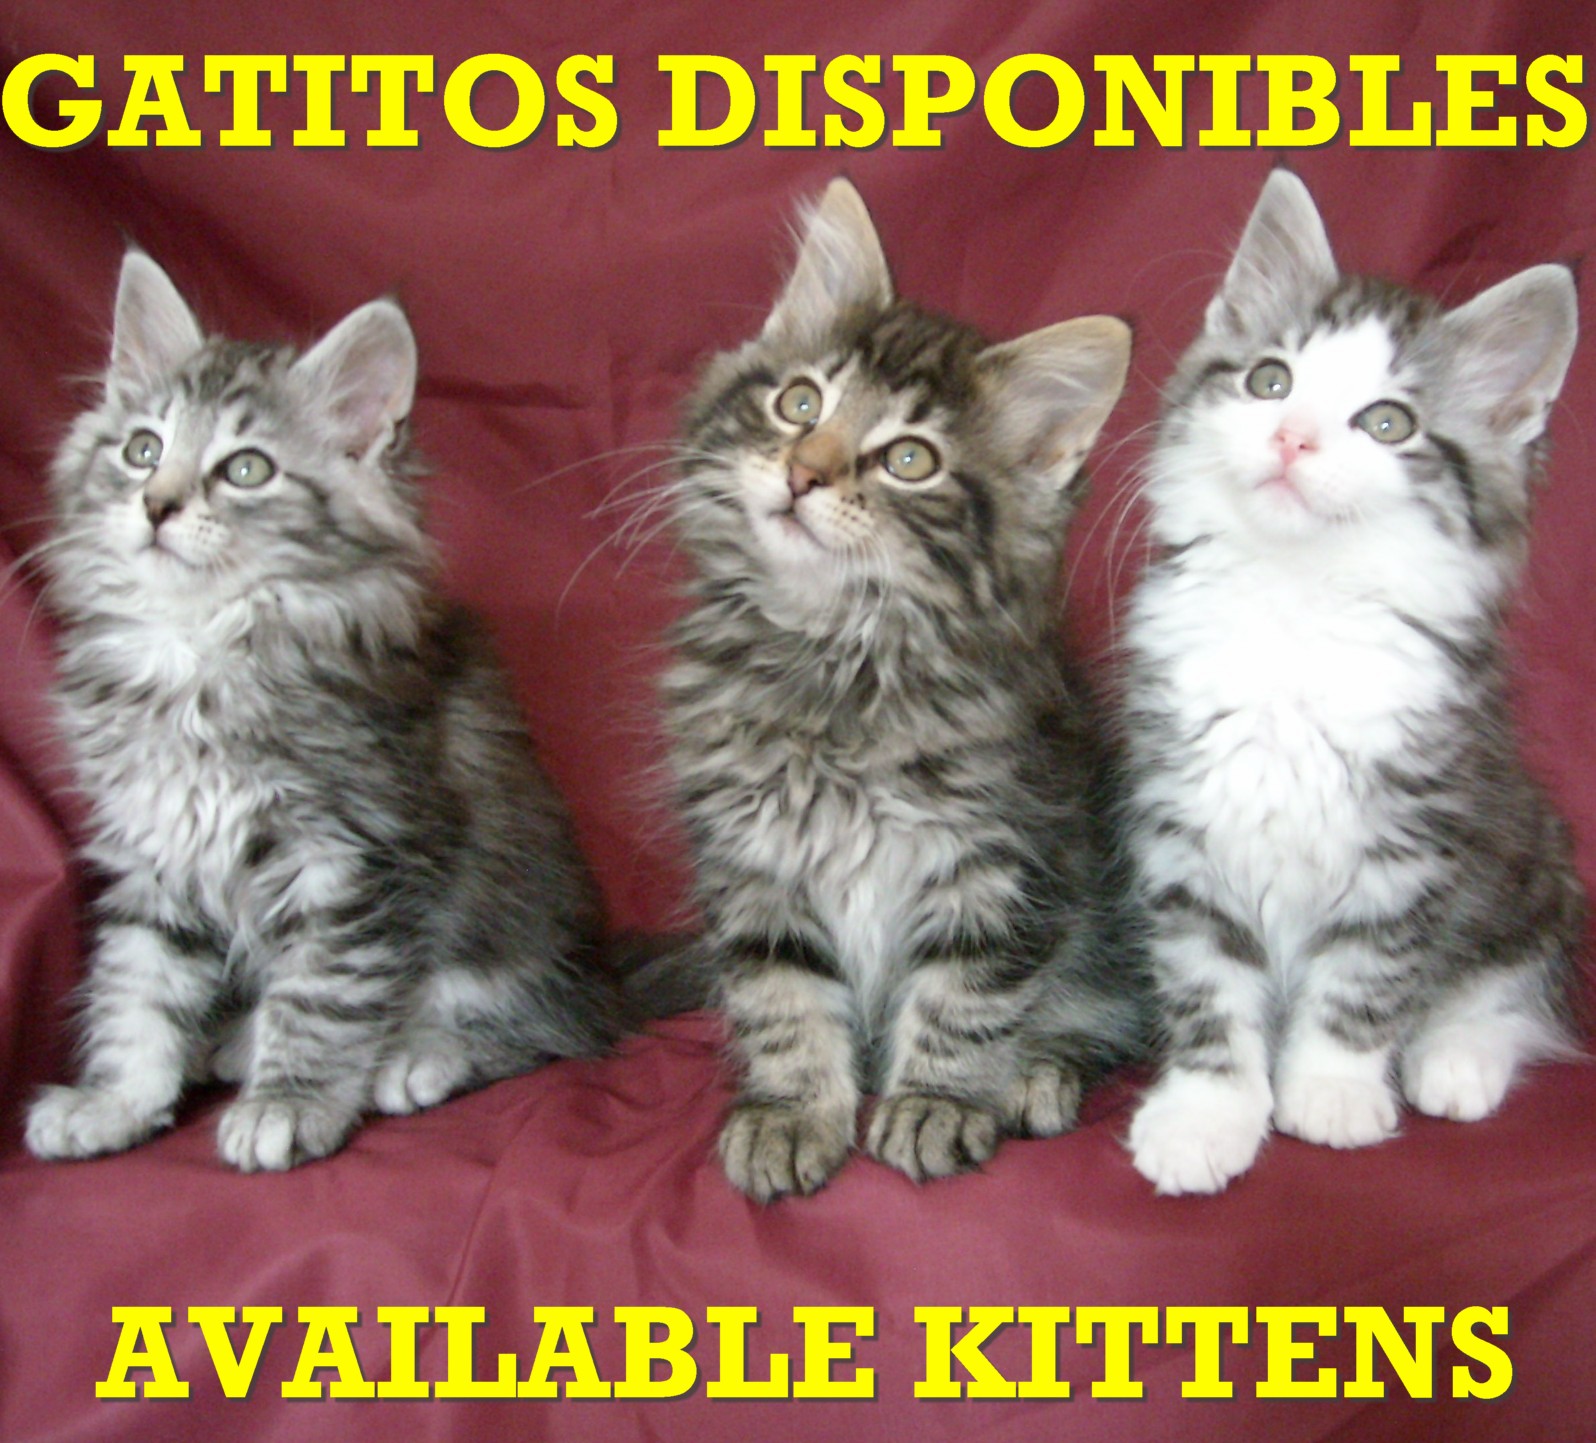 Gatitos disponibles / Available kittens